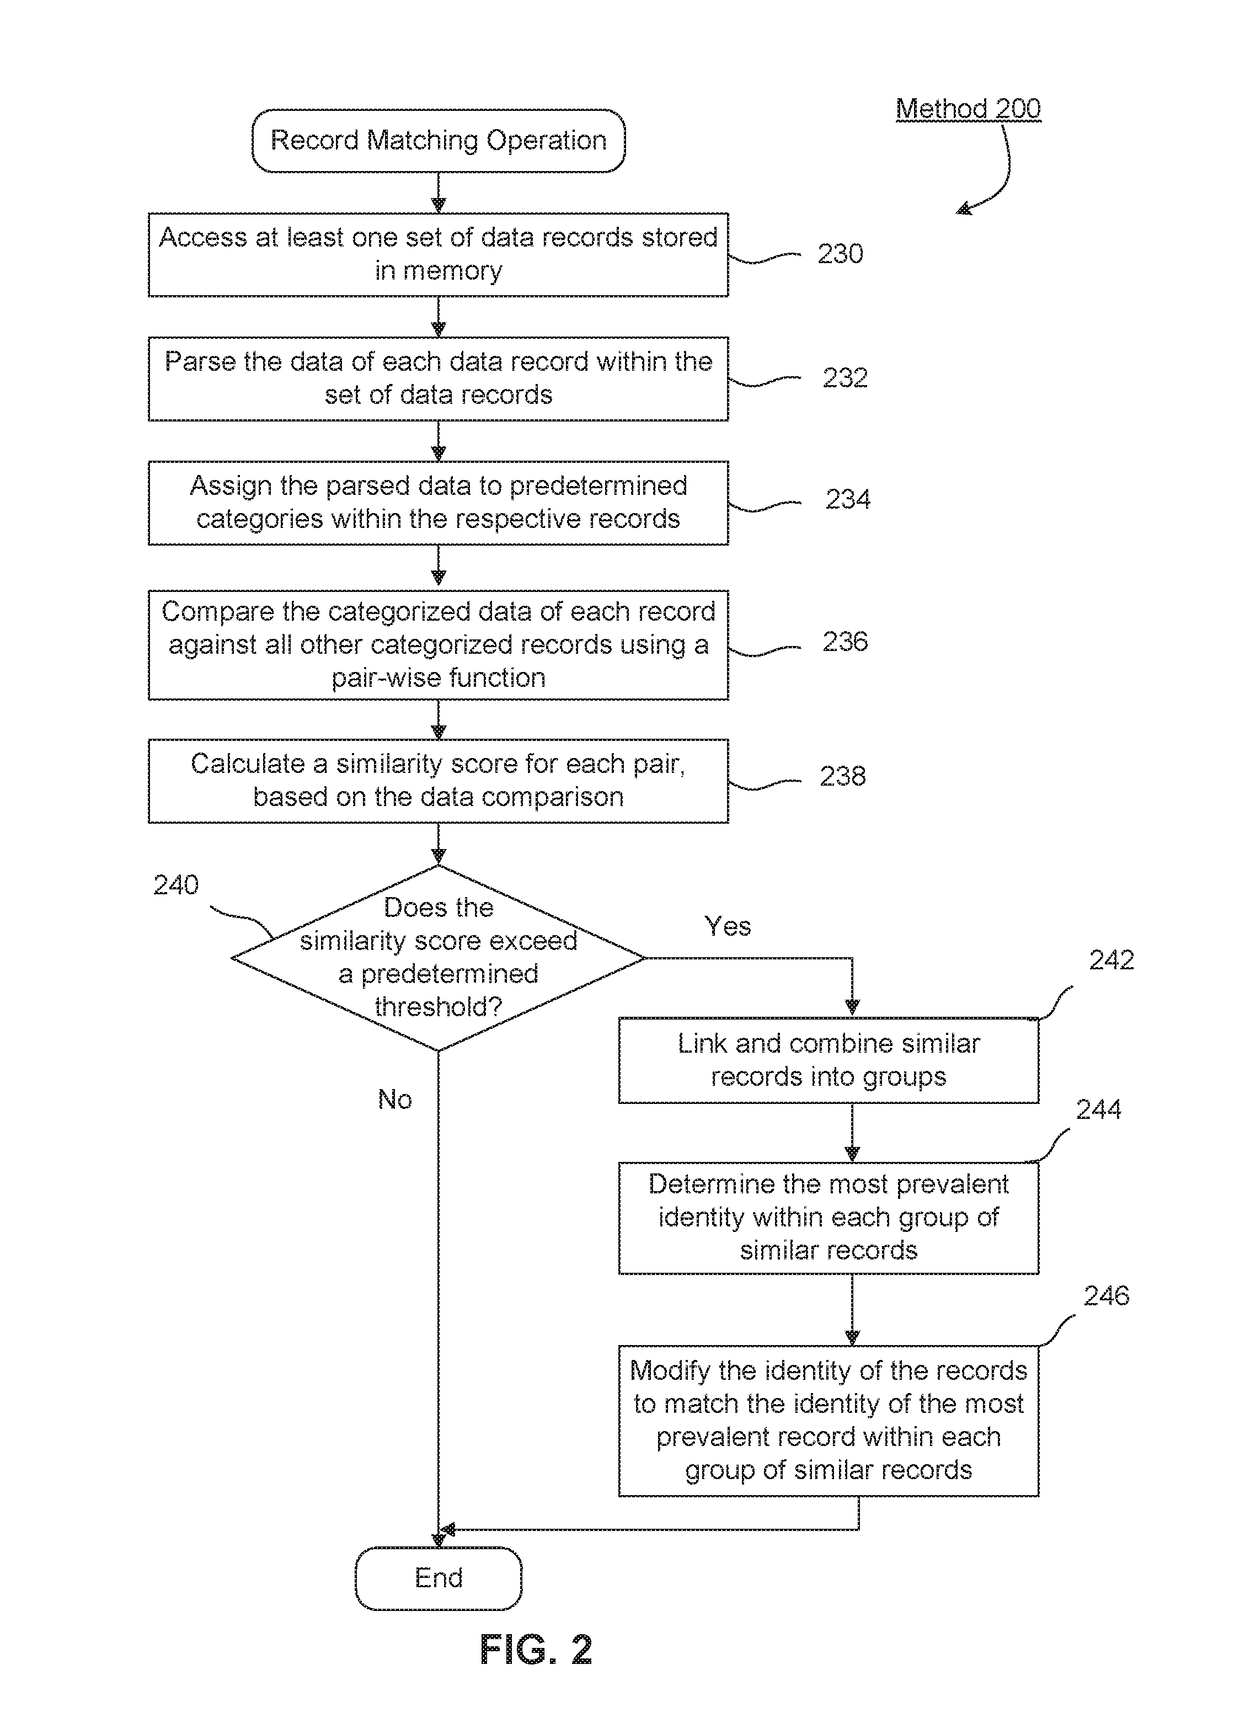 Linking incongruous personal data records, and applications thereof